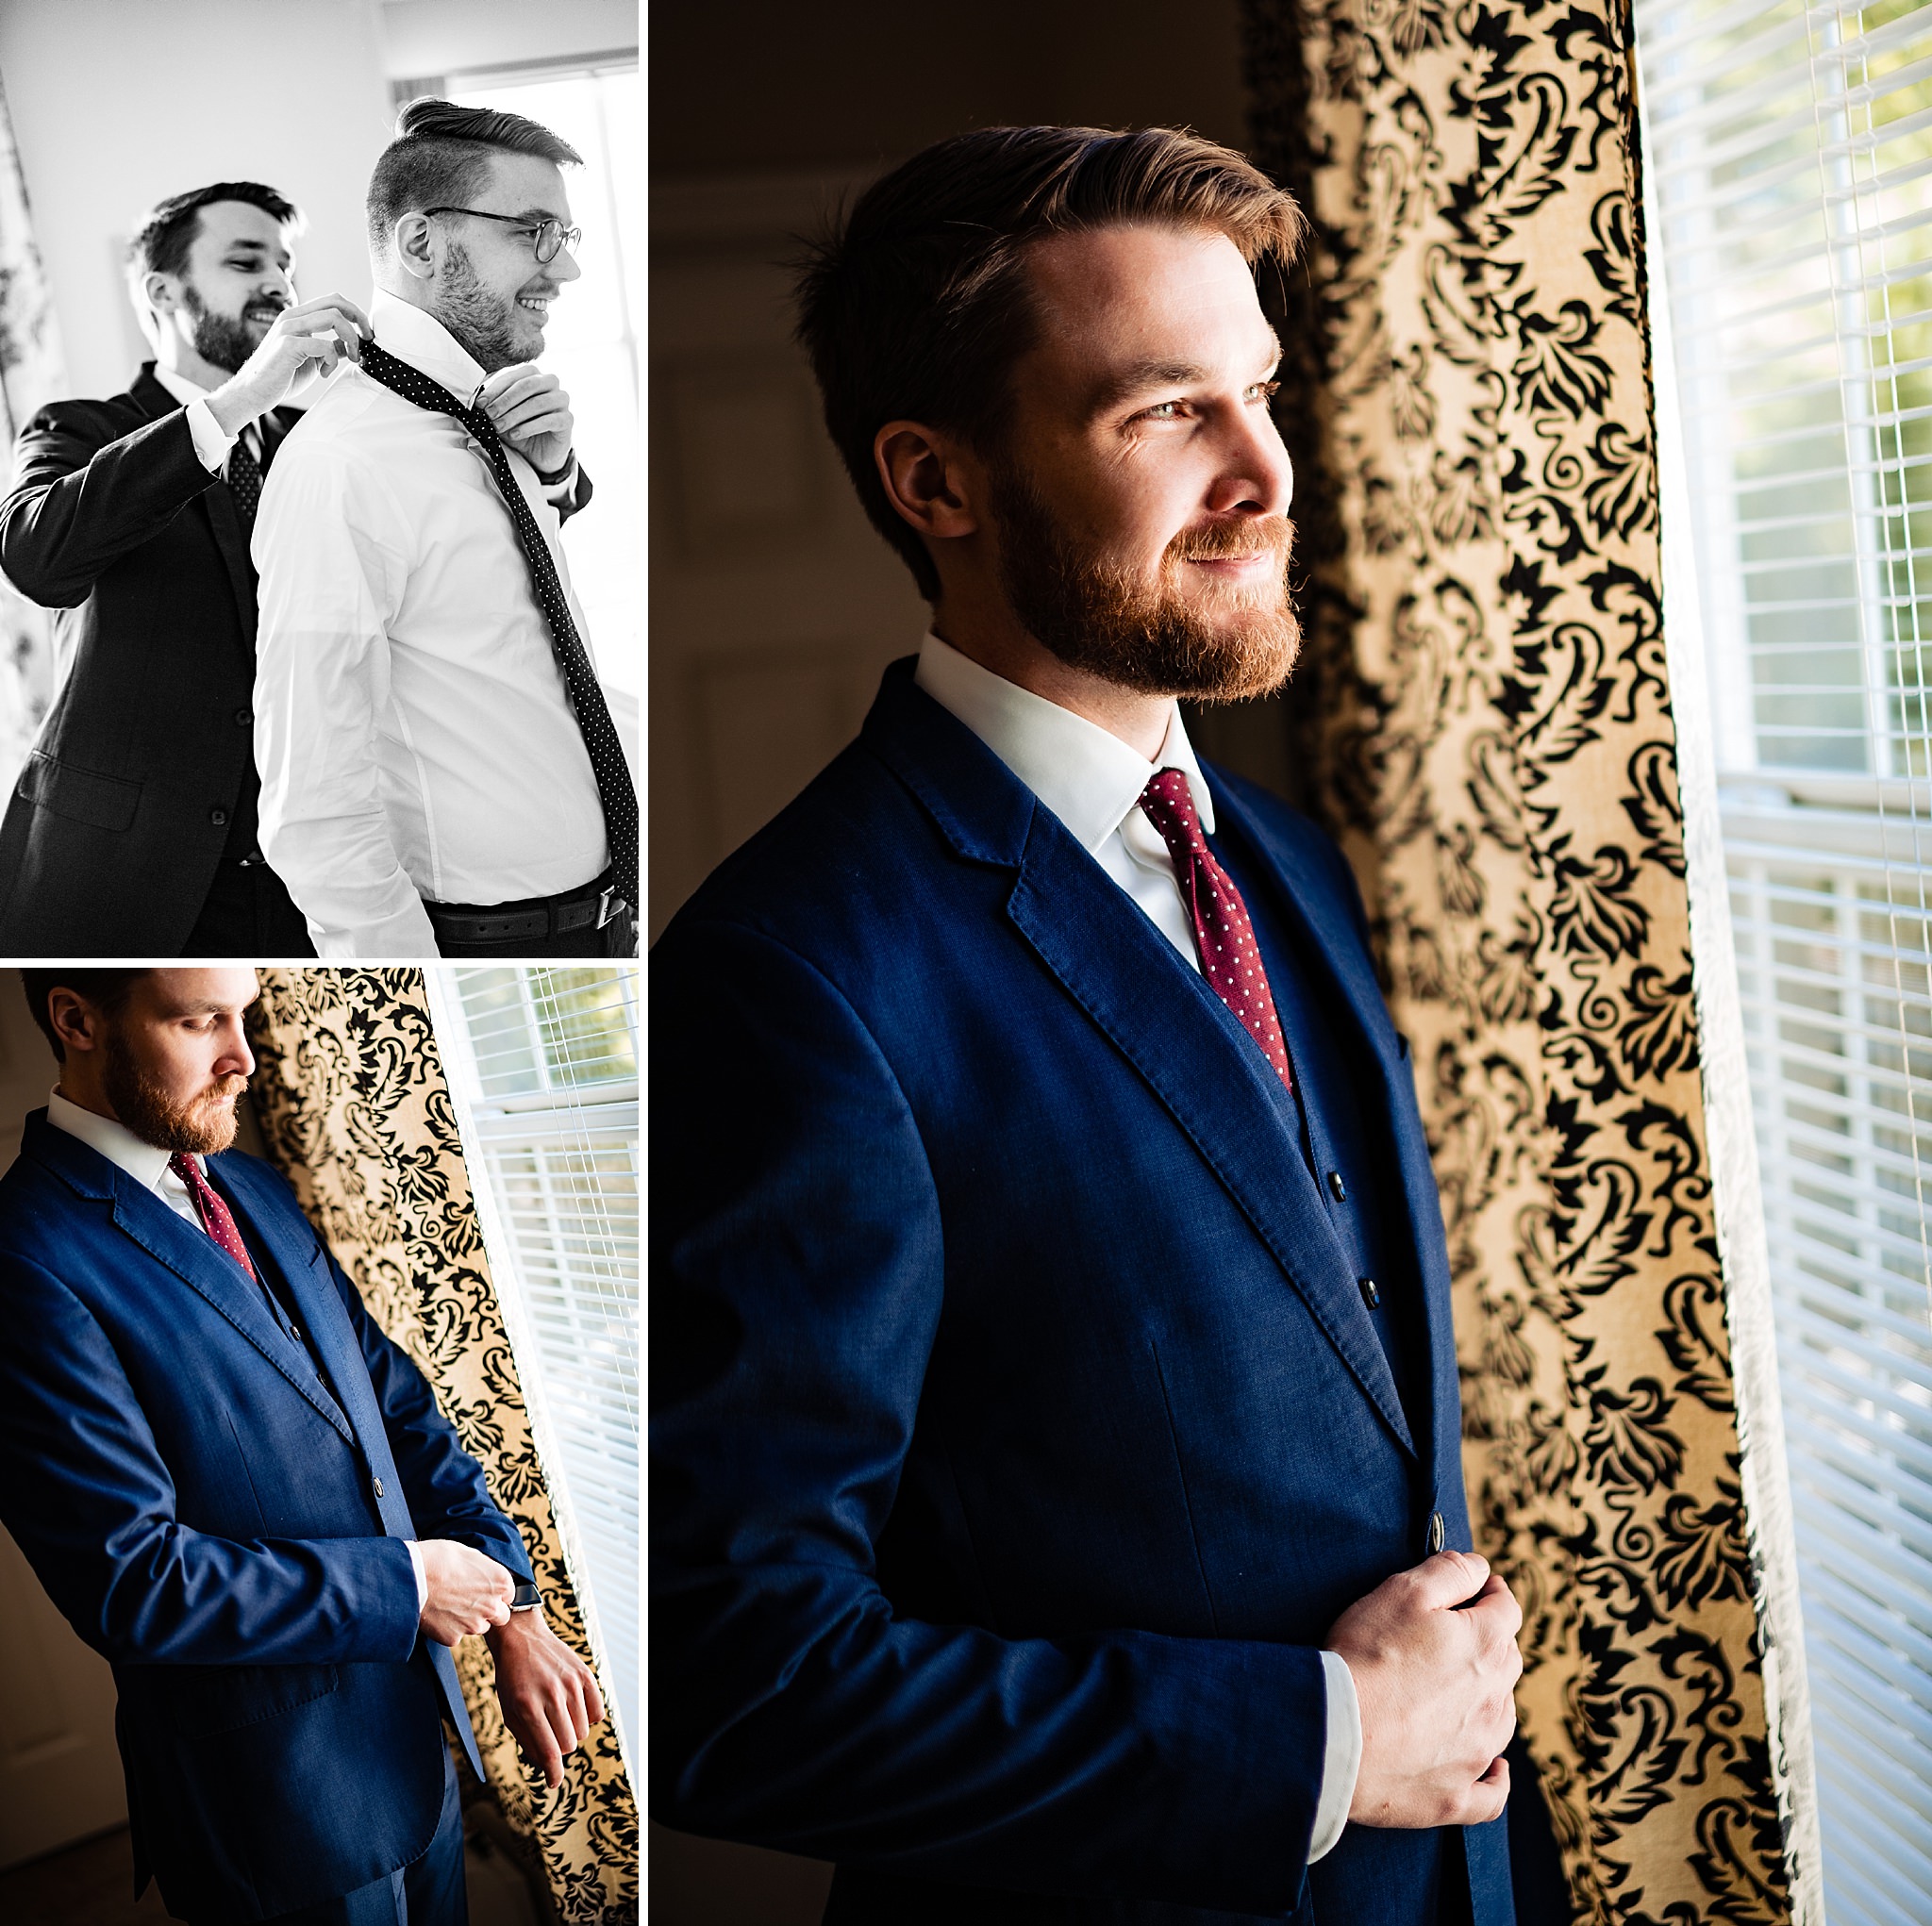 Groom gets ready for his wedding in a navy blue suit with a dark red tie